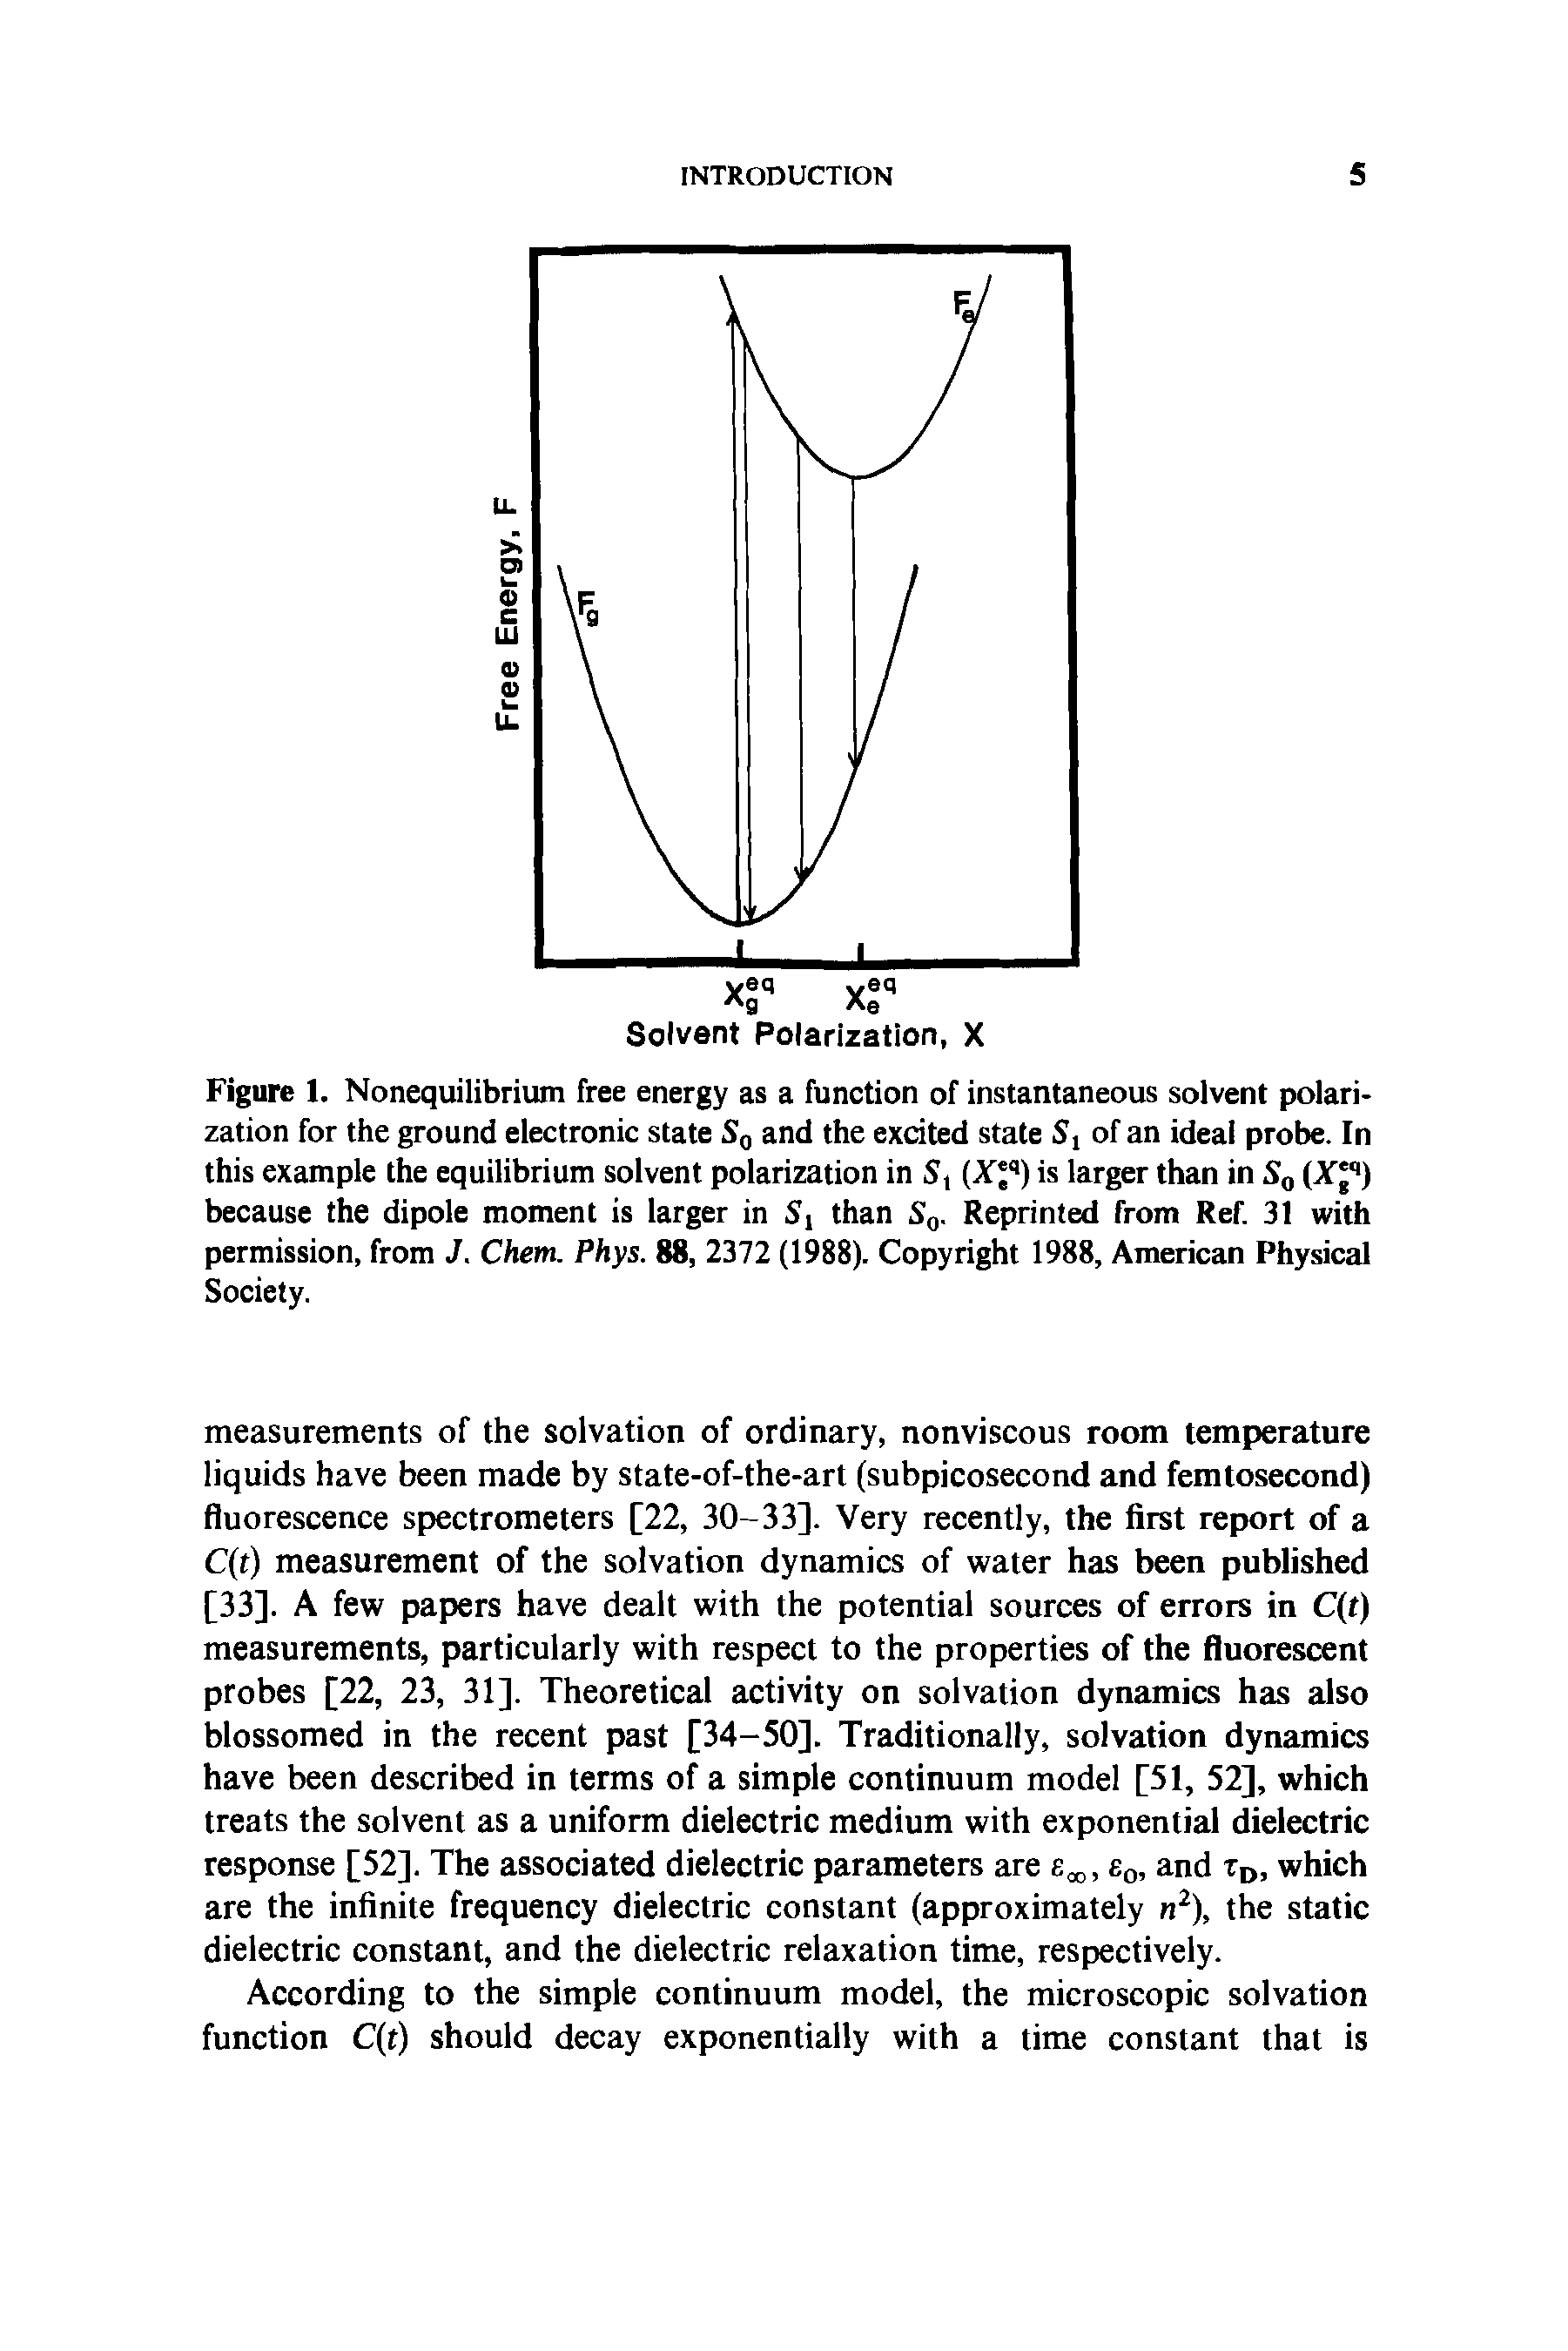 Figure 1. Nonequilibrium free energy as a function of instantaneous solvent polarization for the ground electronic state S0 and the excited state Si of an ideal probe. In this example the equilibrium solvent polarization in S, (X q) is larger than in S0 (Ar q) because the dipole moment is larger in Si than S0. Reprinted from Ref. 31 with permission, from J. Chem. Phys. 88, 2372 (1988). Copyright 1988, American Physical Society.